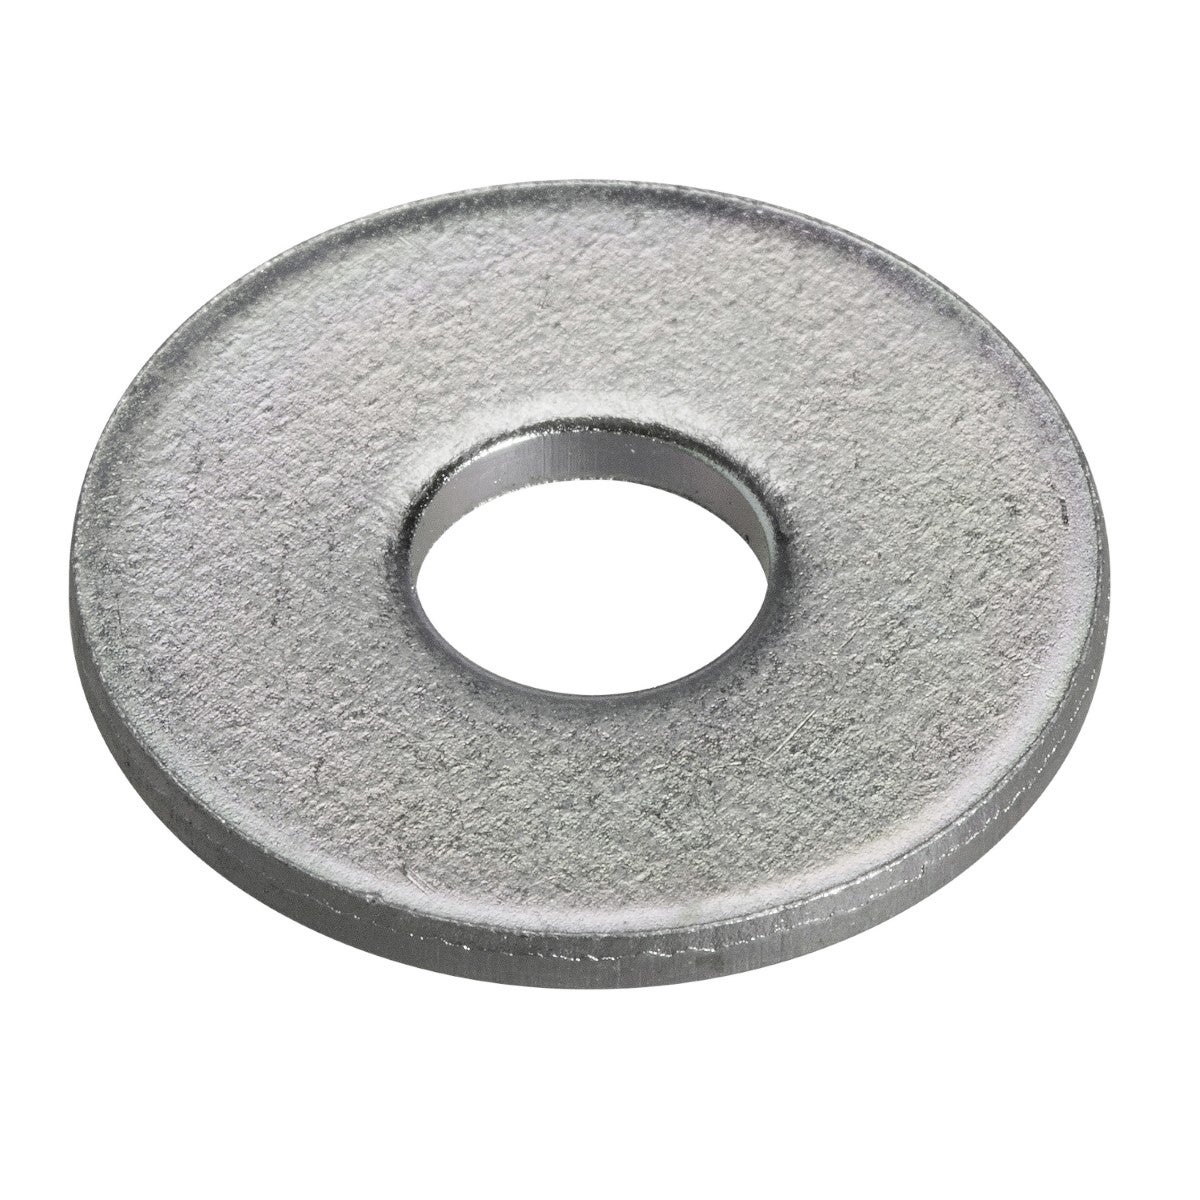 Flat washer, Linergy LGY, M8, 20mm dia, for flexible busbar, set of 20